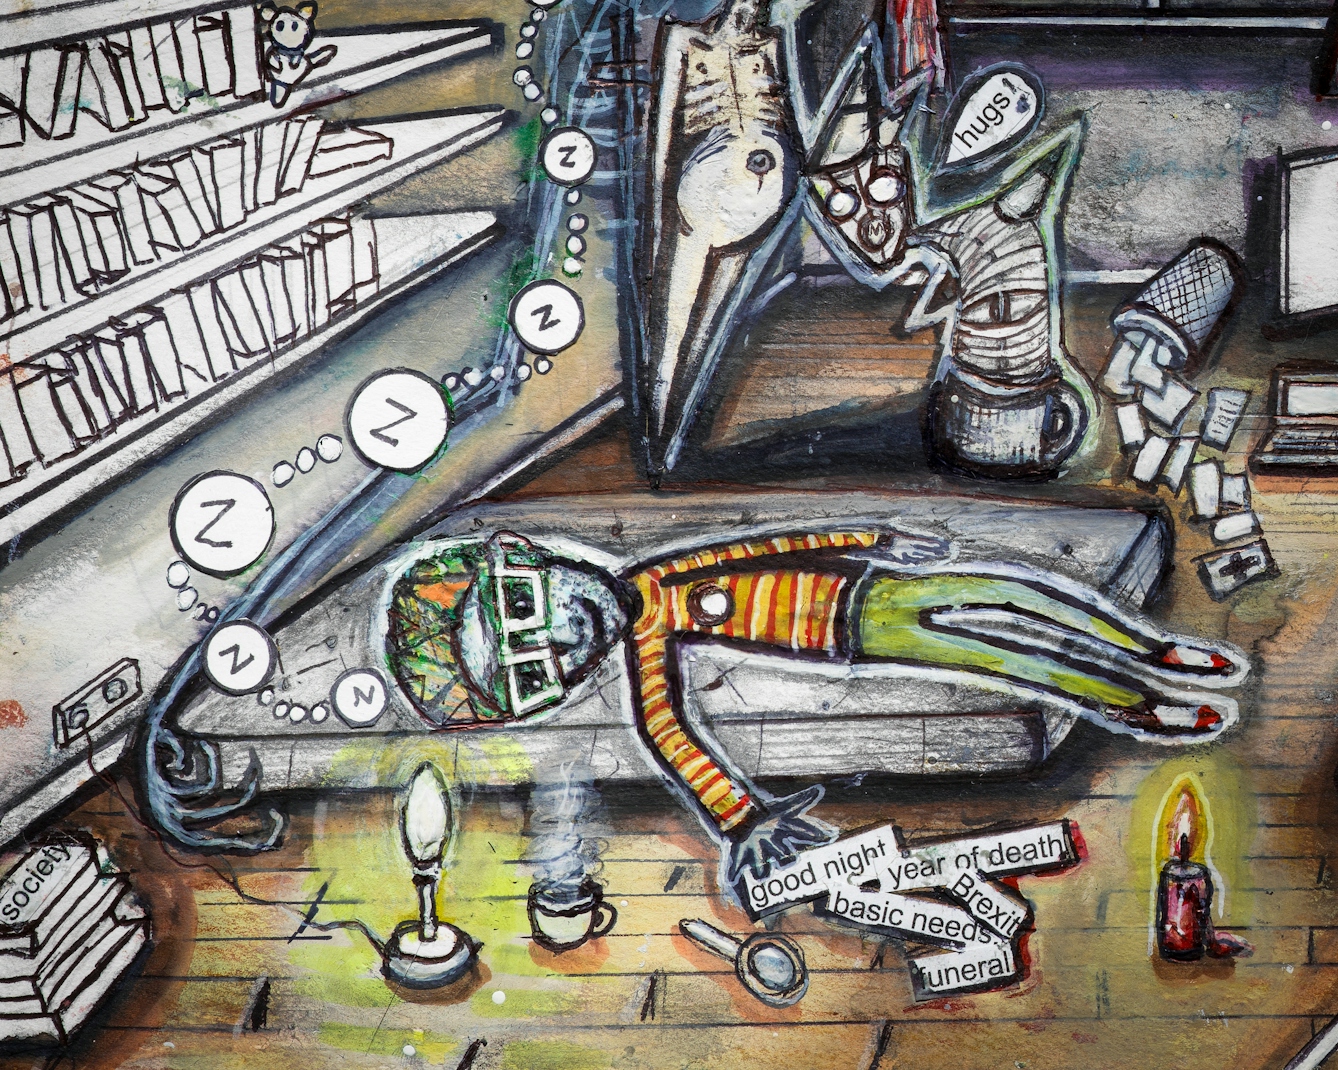 Artwork using watercolour and ink incorporating collaged words throughout the scene. The artwork shows a busy household room. In the foreground, a man is sleeping on a mattress on the floor fully clothed.  Around him are the words and phrases ‘good night’, ‘year of death’, ‘Brexit’, and ‘basic needs’, as well as many books and a few candles. Besides him are three ghoulish creatures, one with a speech bubble with the word ‘hugs’ followed by an exclamation mark. 